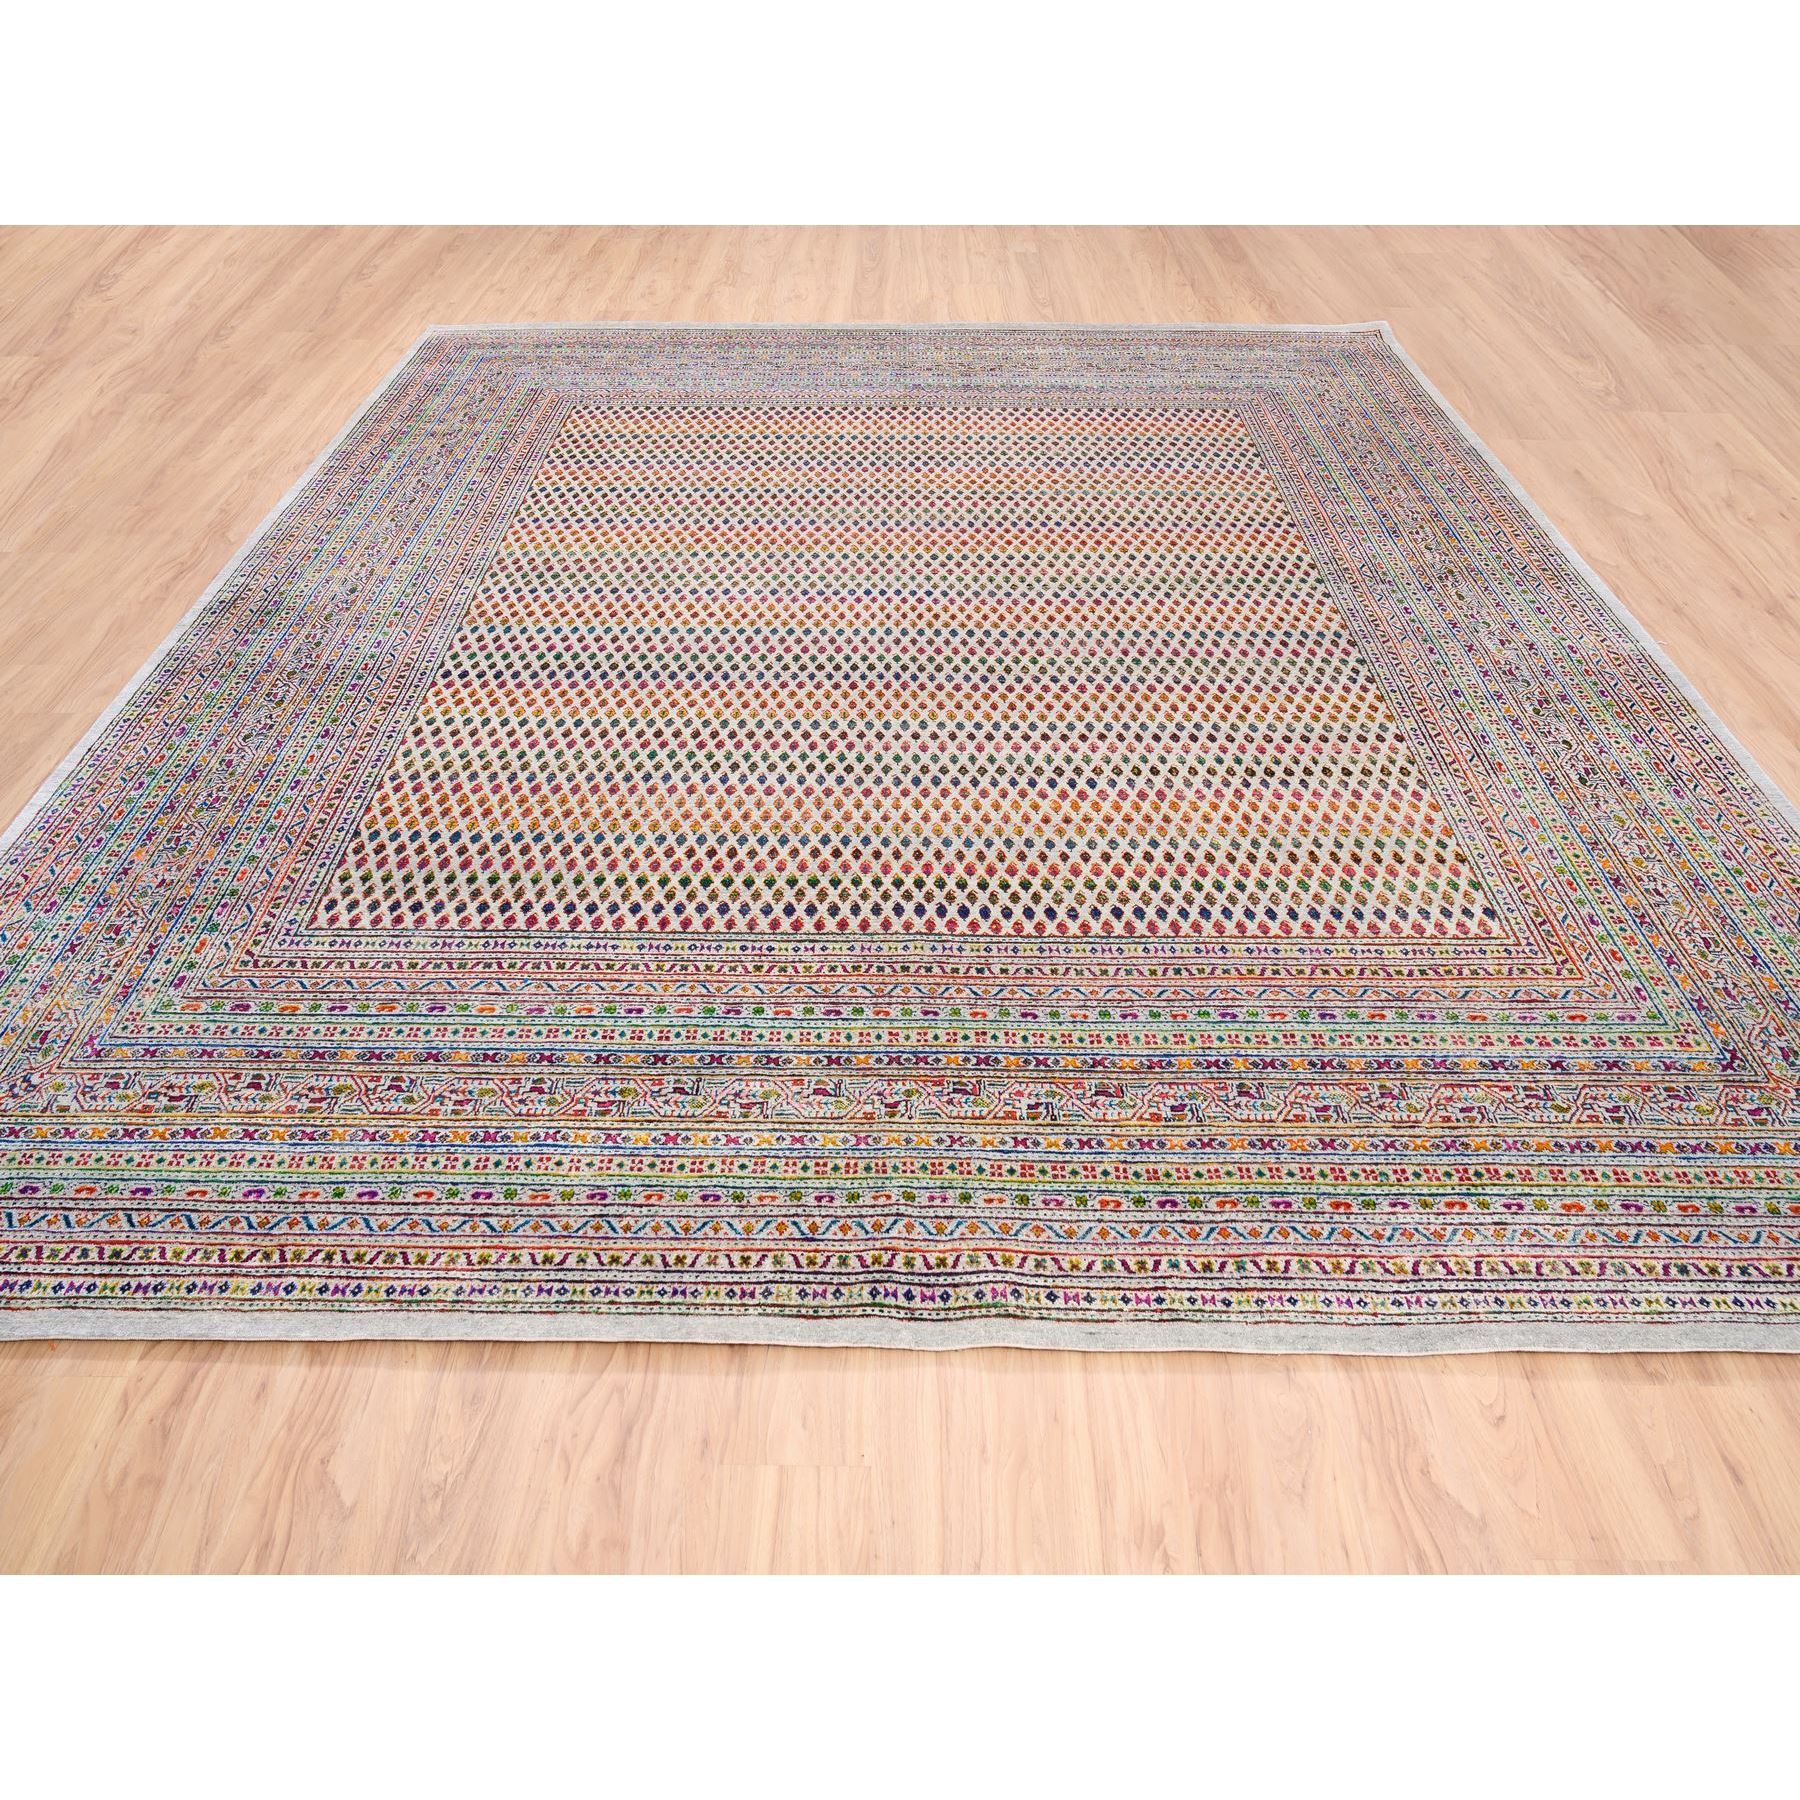 12'x12' Colorful Wool And Sari Silk Sarouk Mir Inspired With Repetitive Boteh Design Hand Woven Oriental Square Rug 